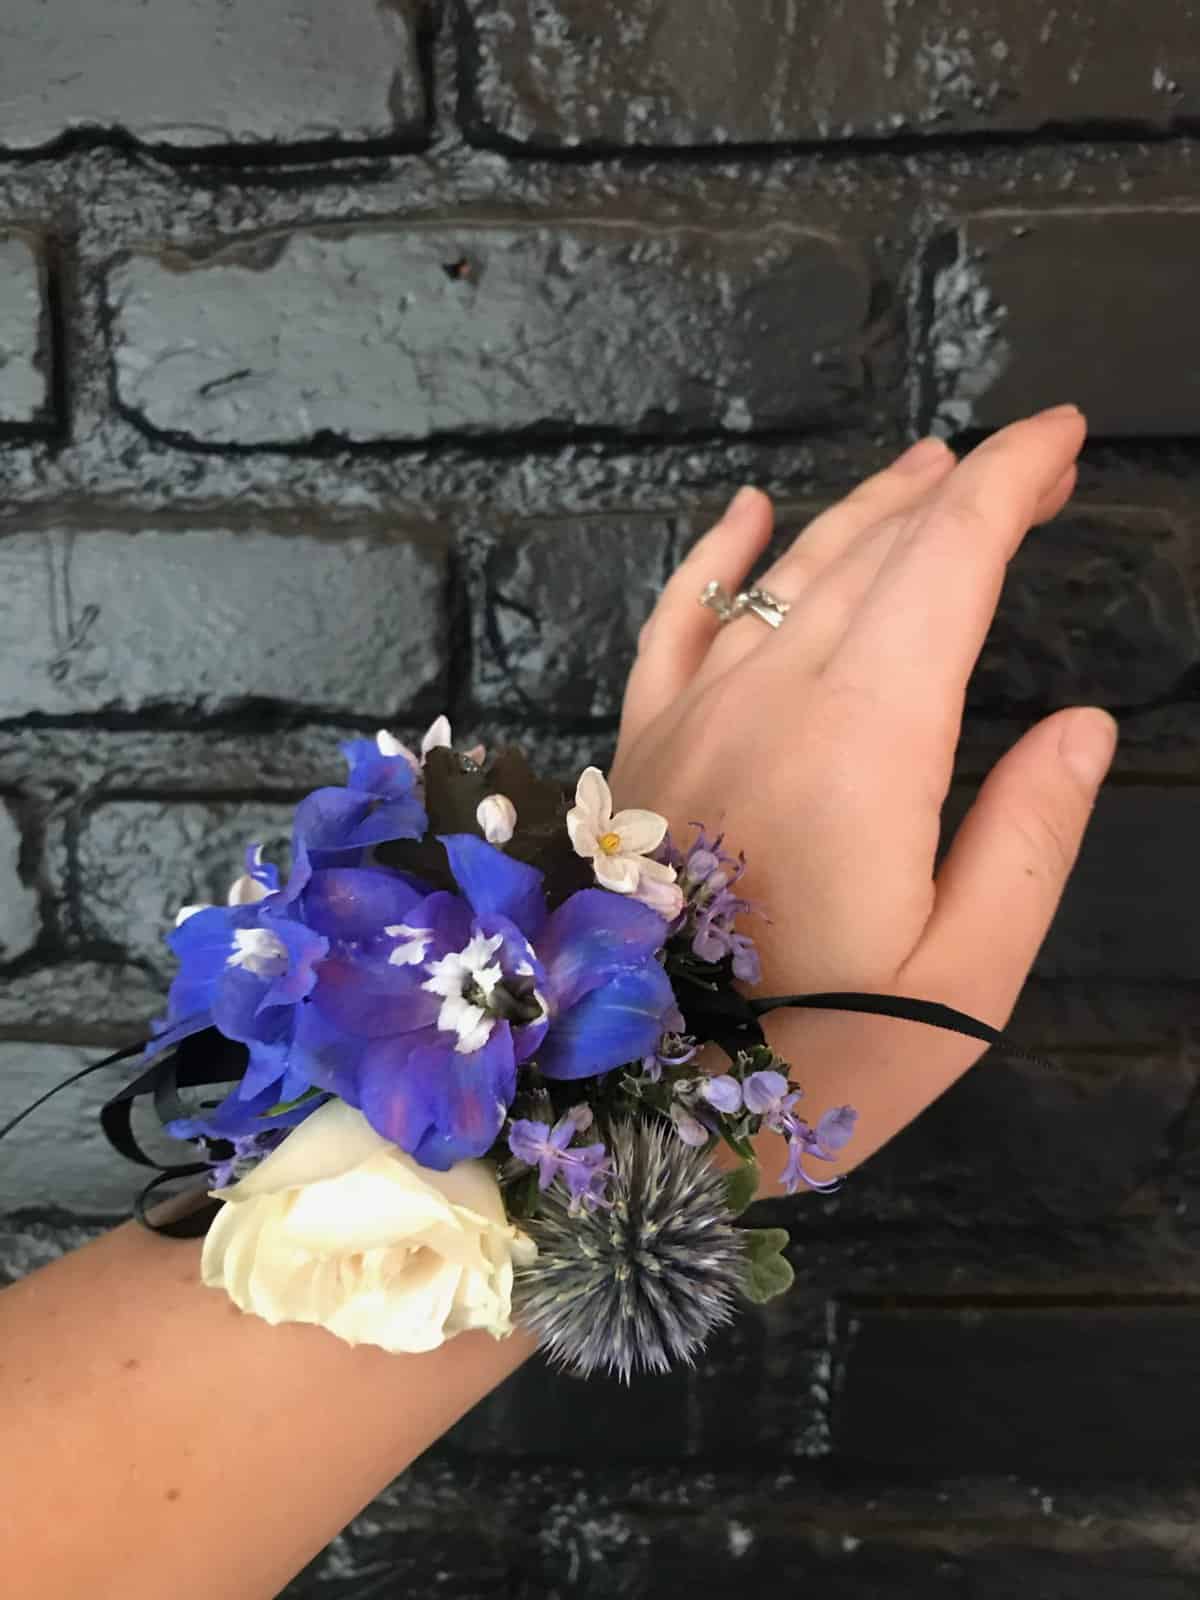 Our Top Tips on How to Make a Corsage and Boutonniere